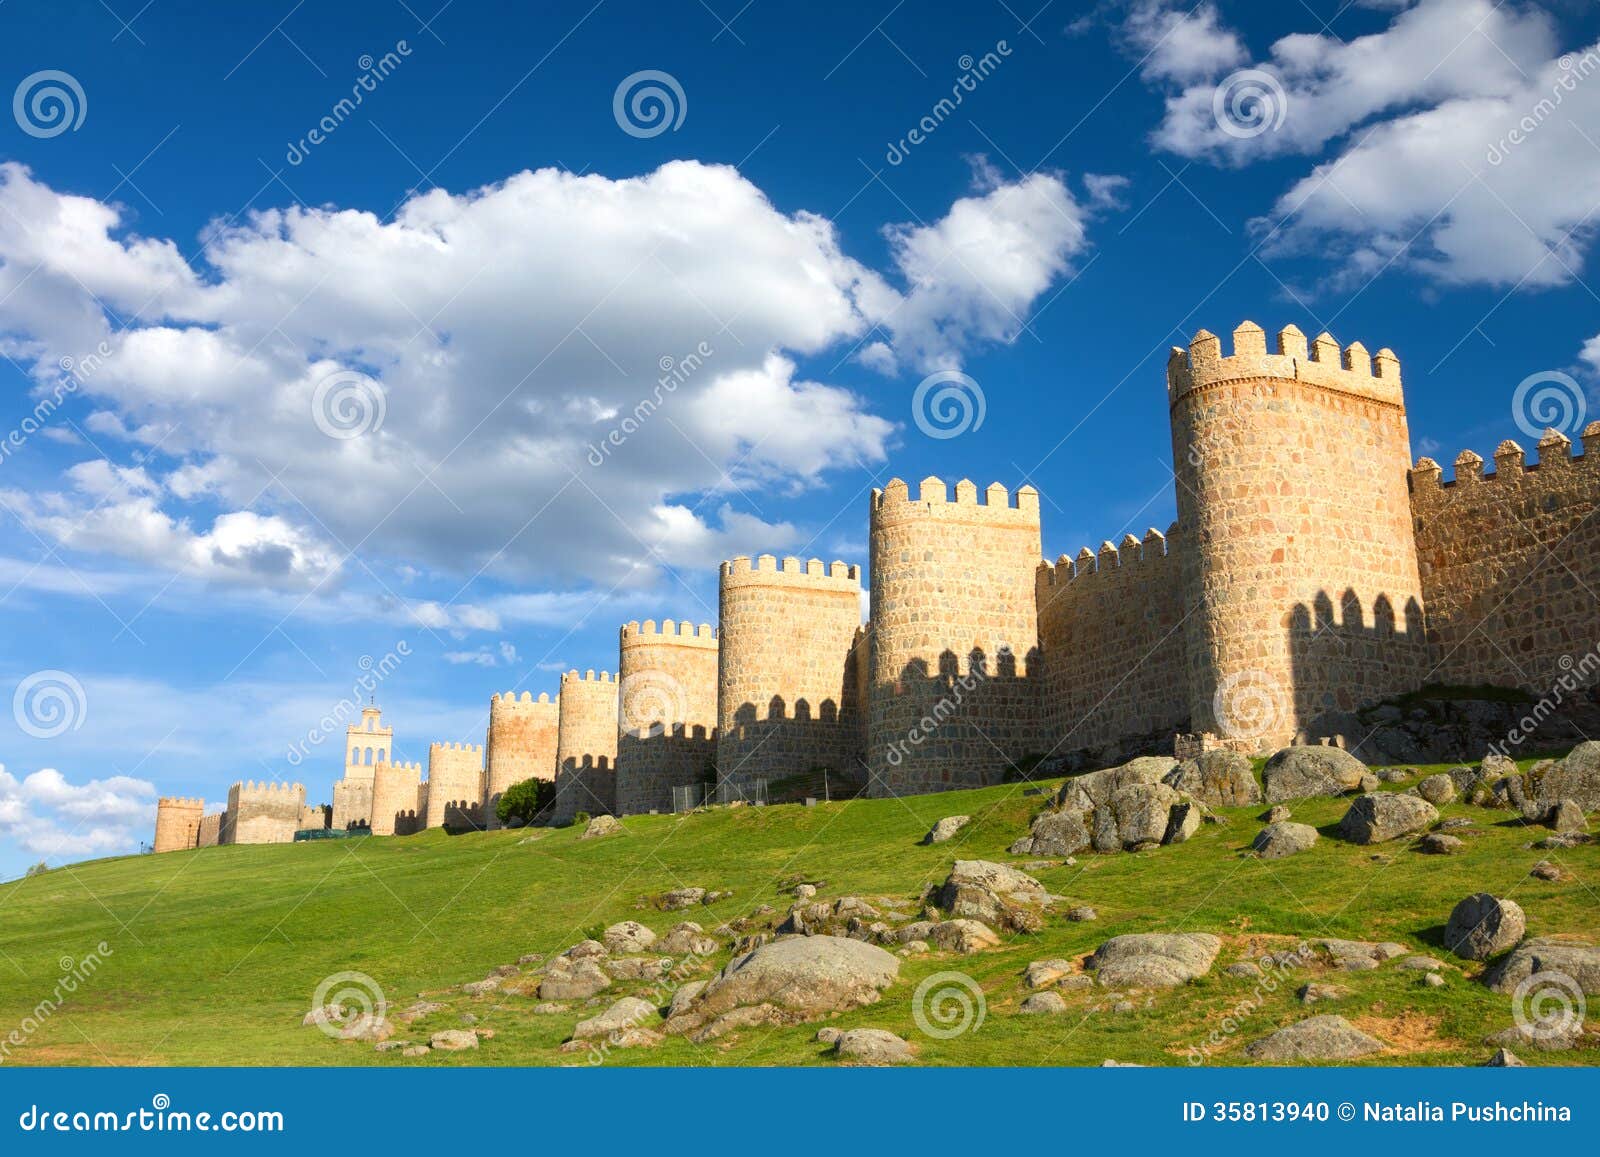 medieval city wall built in the romanesque style, avila, spain